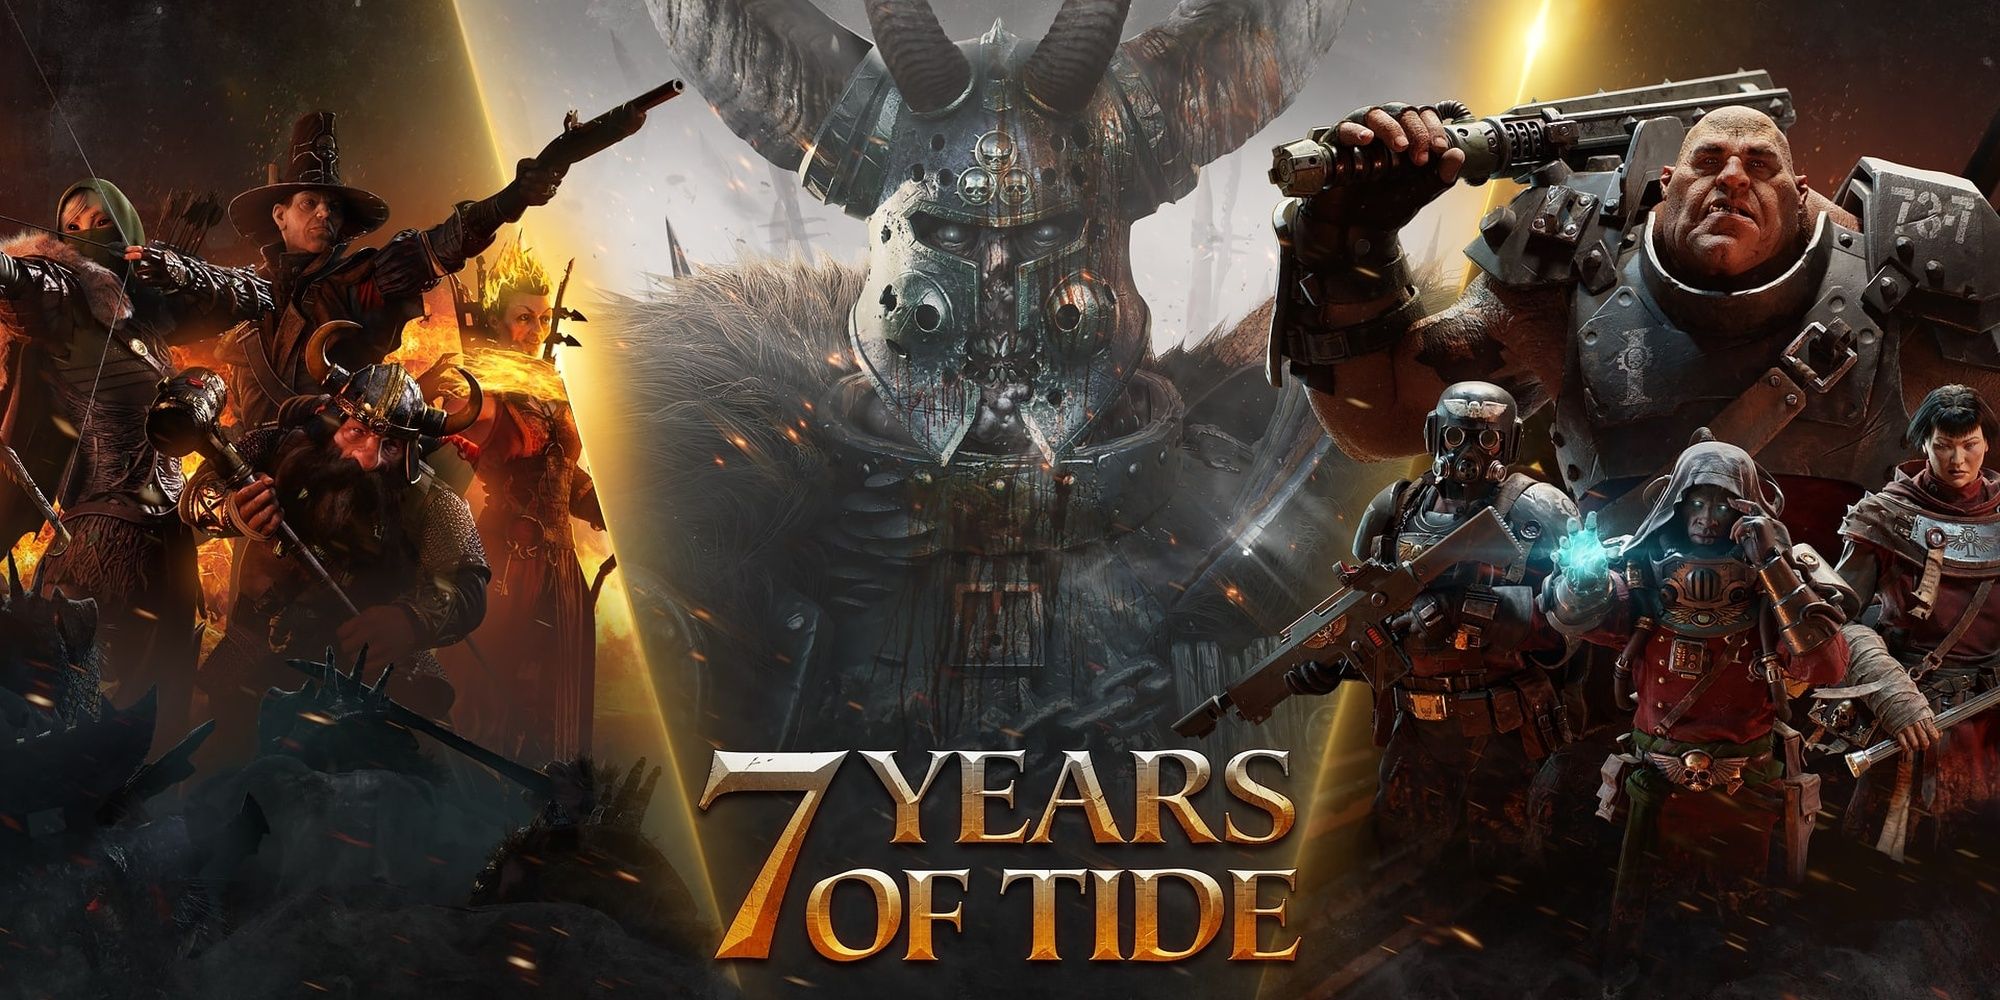 Fatshark's 7 Years of Tide promotional picture including characters from Vermintide 1 and 2 and Darktide